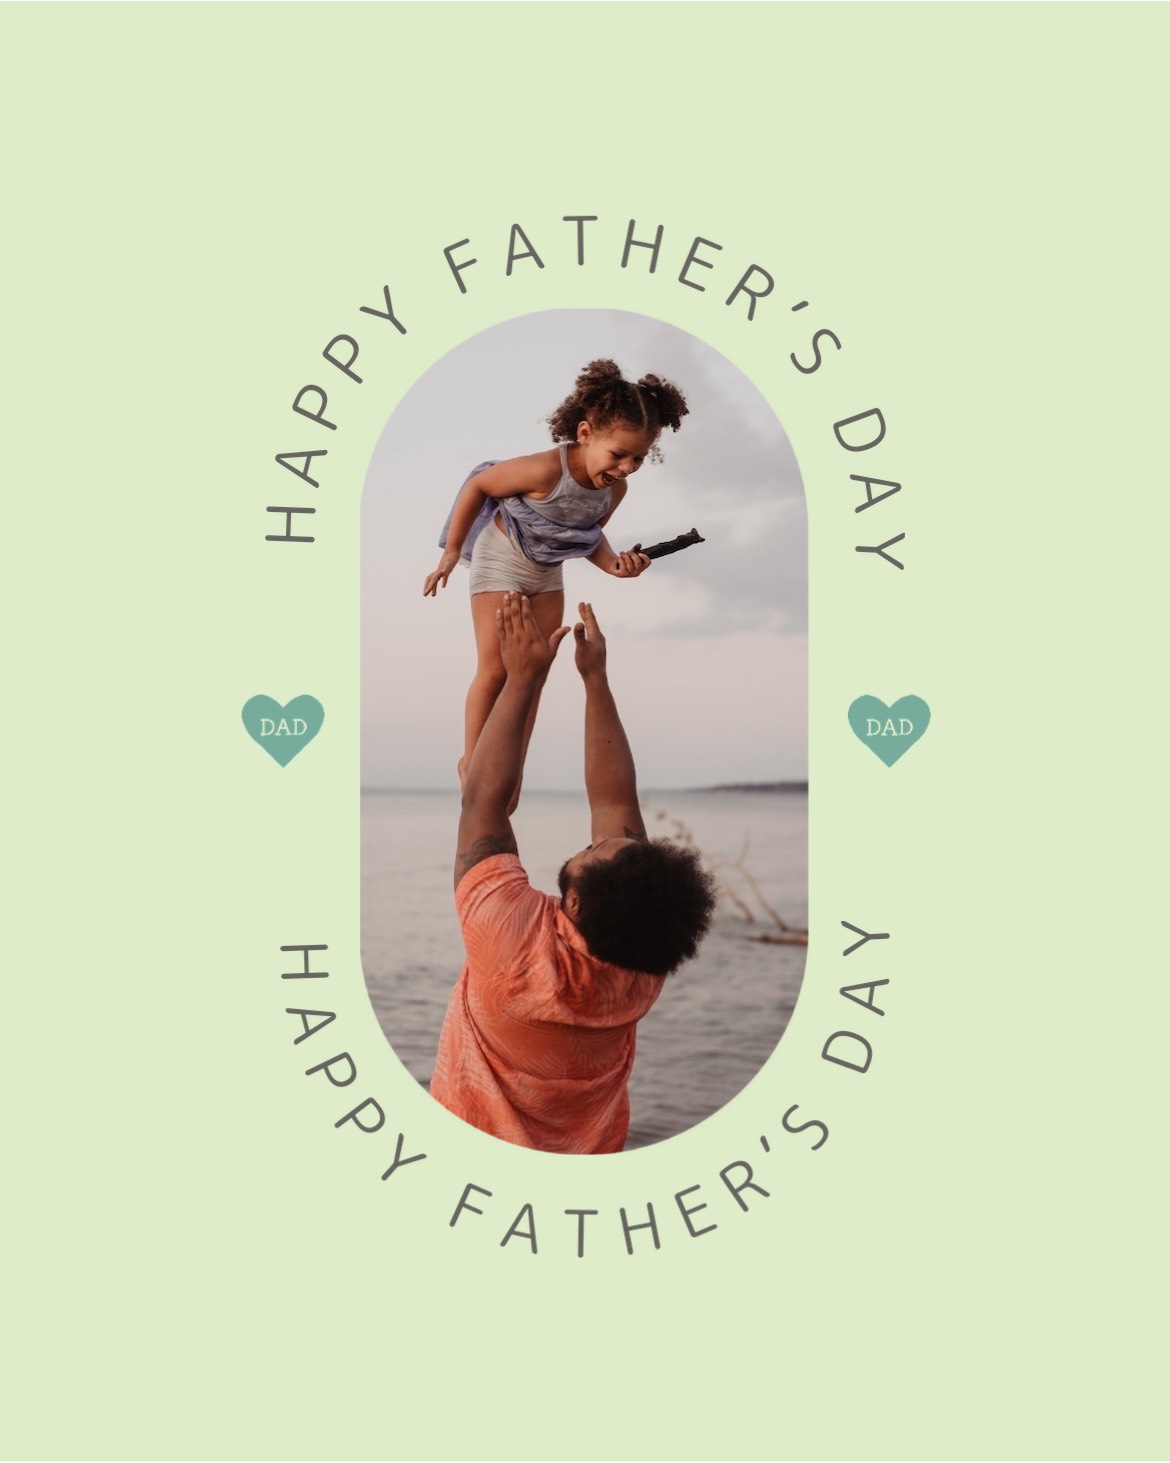 Dad And His Child Happy Father’S Day Instagram Template